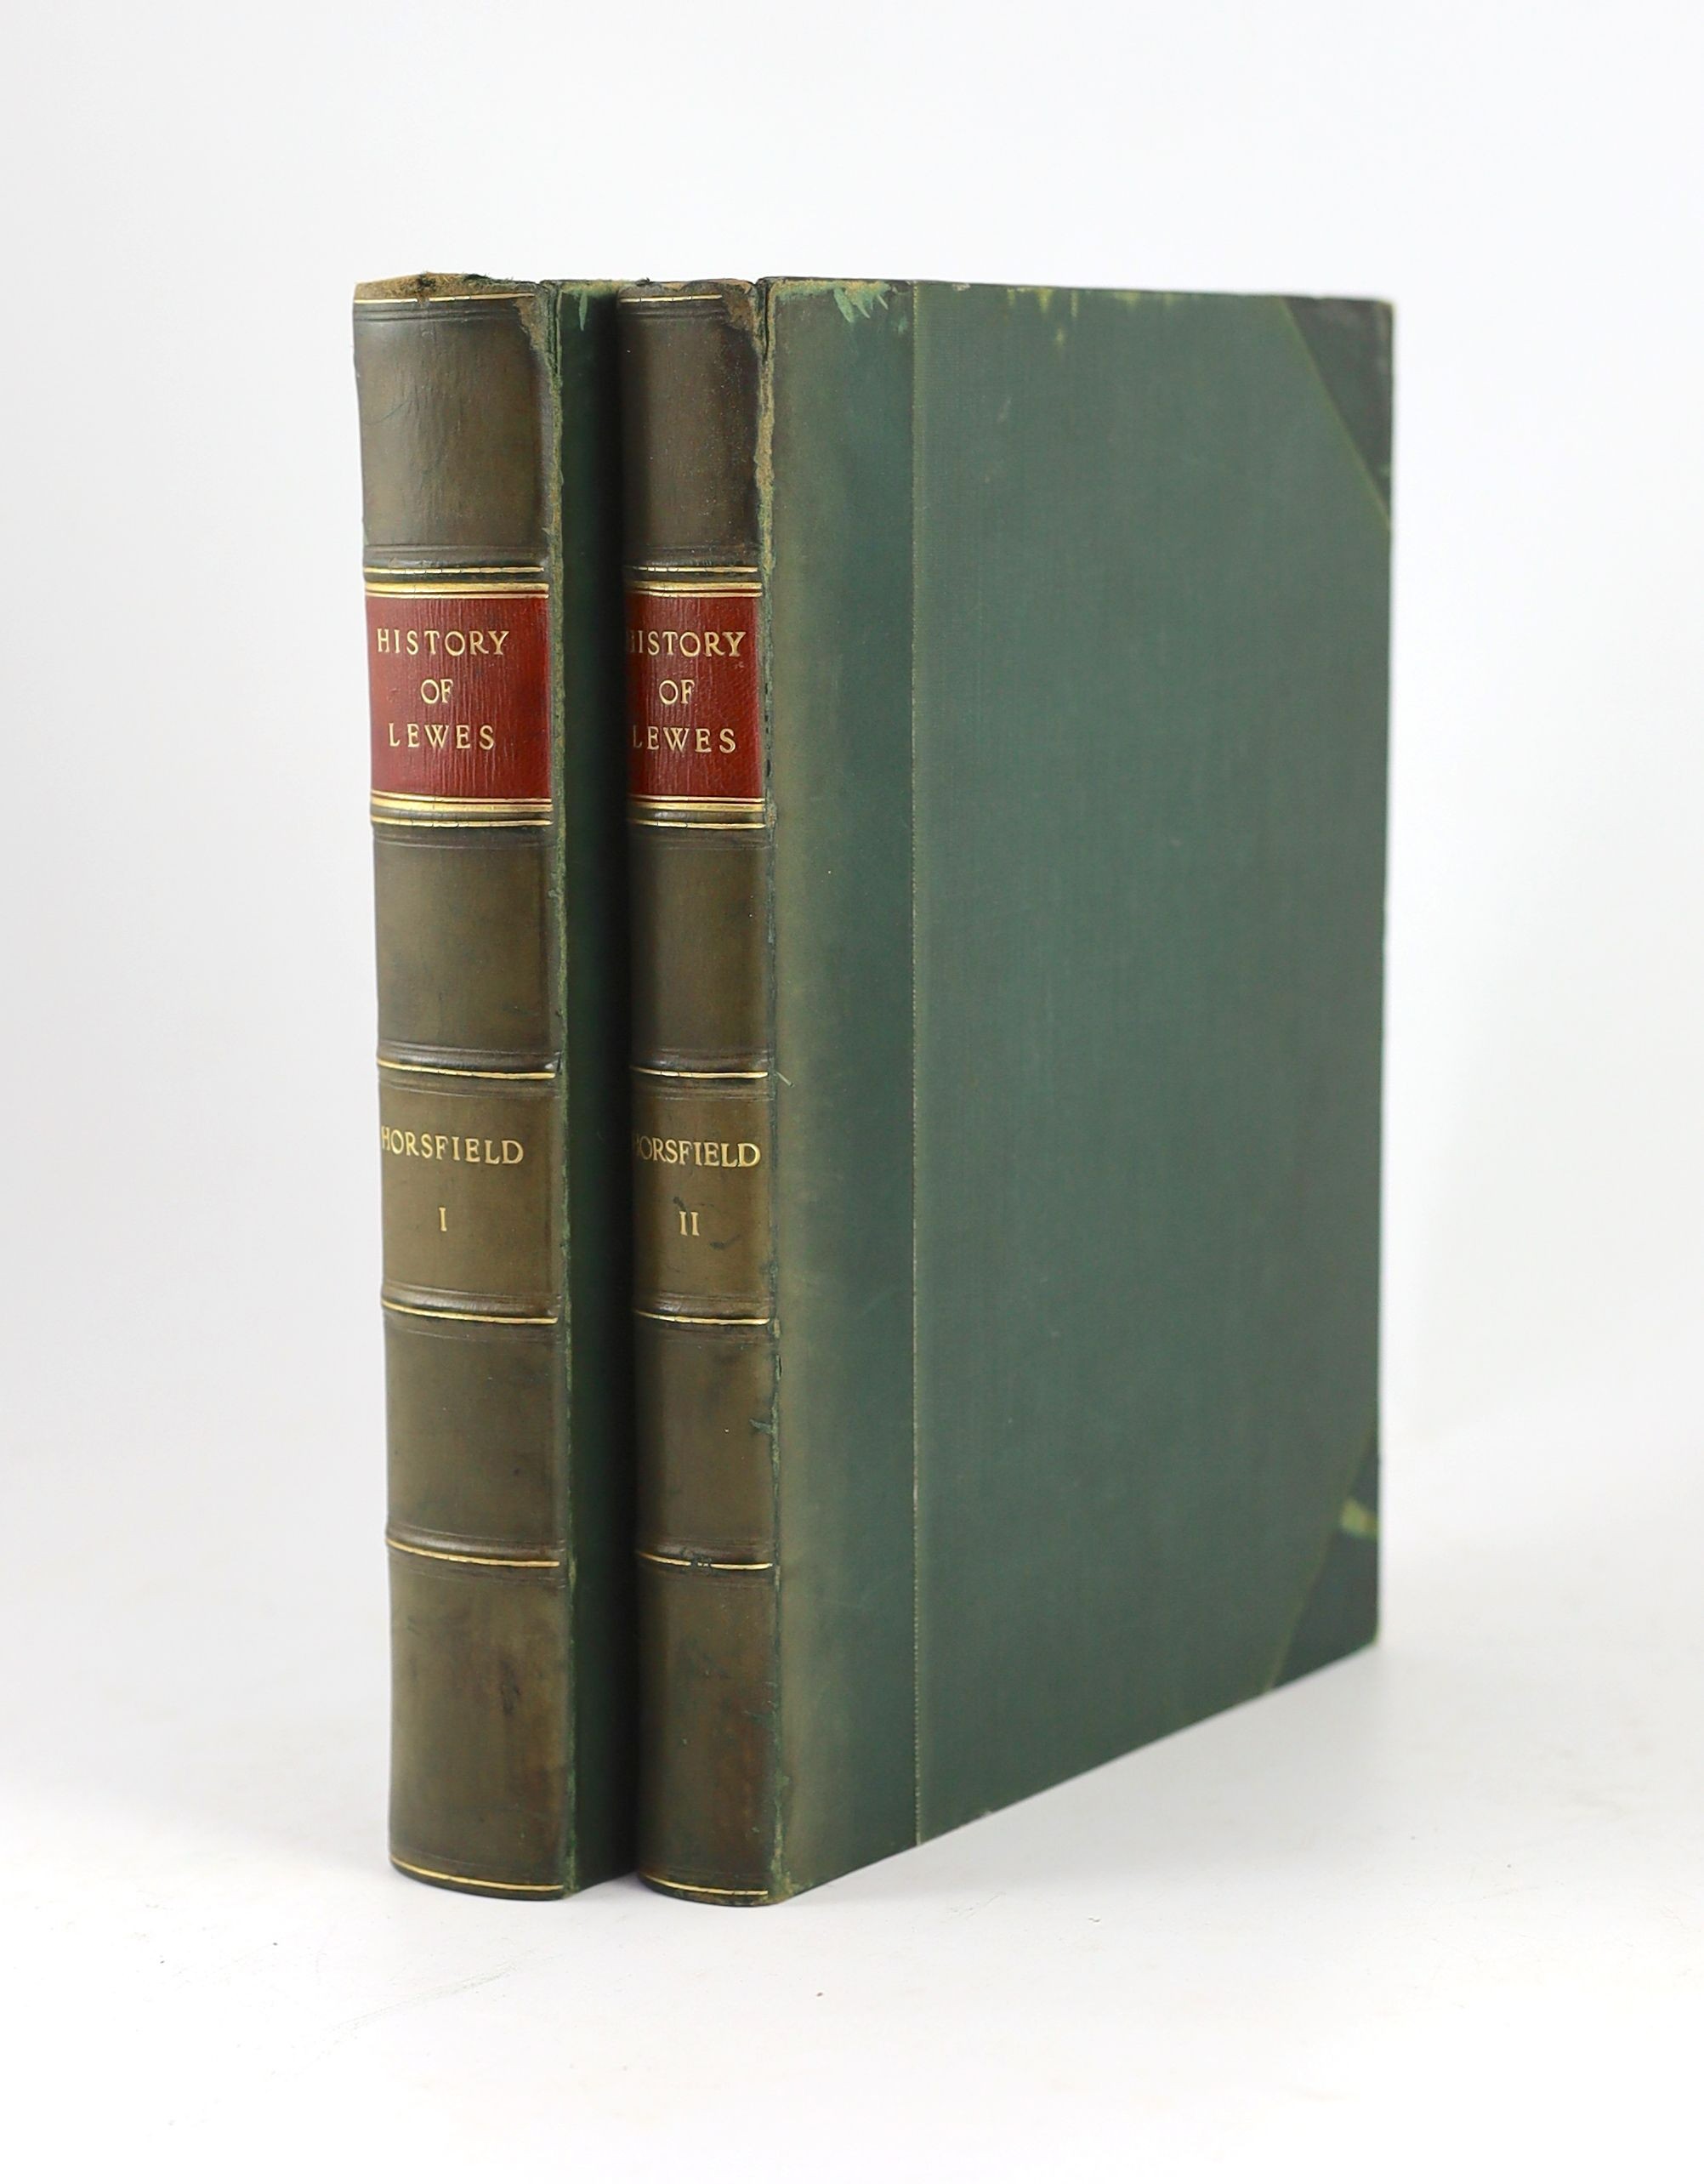 Horsfield, T.W. - The History and Antiquities of Lewes and its vicinity, 2 vols., first edition, folding map, 30 lithographed plates, 10 engraved plates, wood-engraved illustrations, spotted (as usual), green half calf,